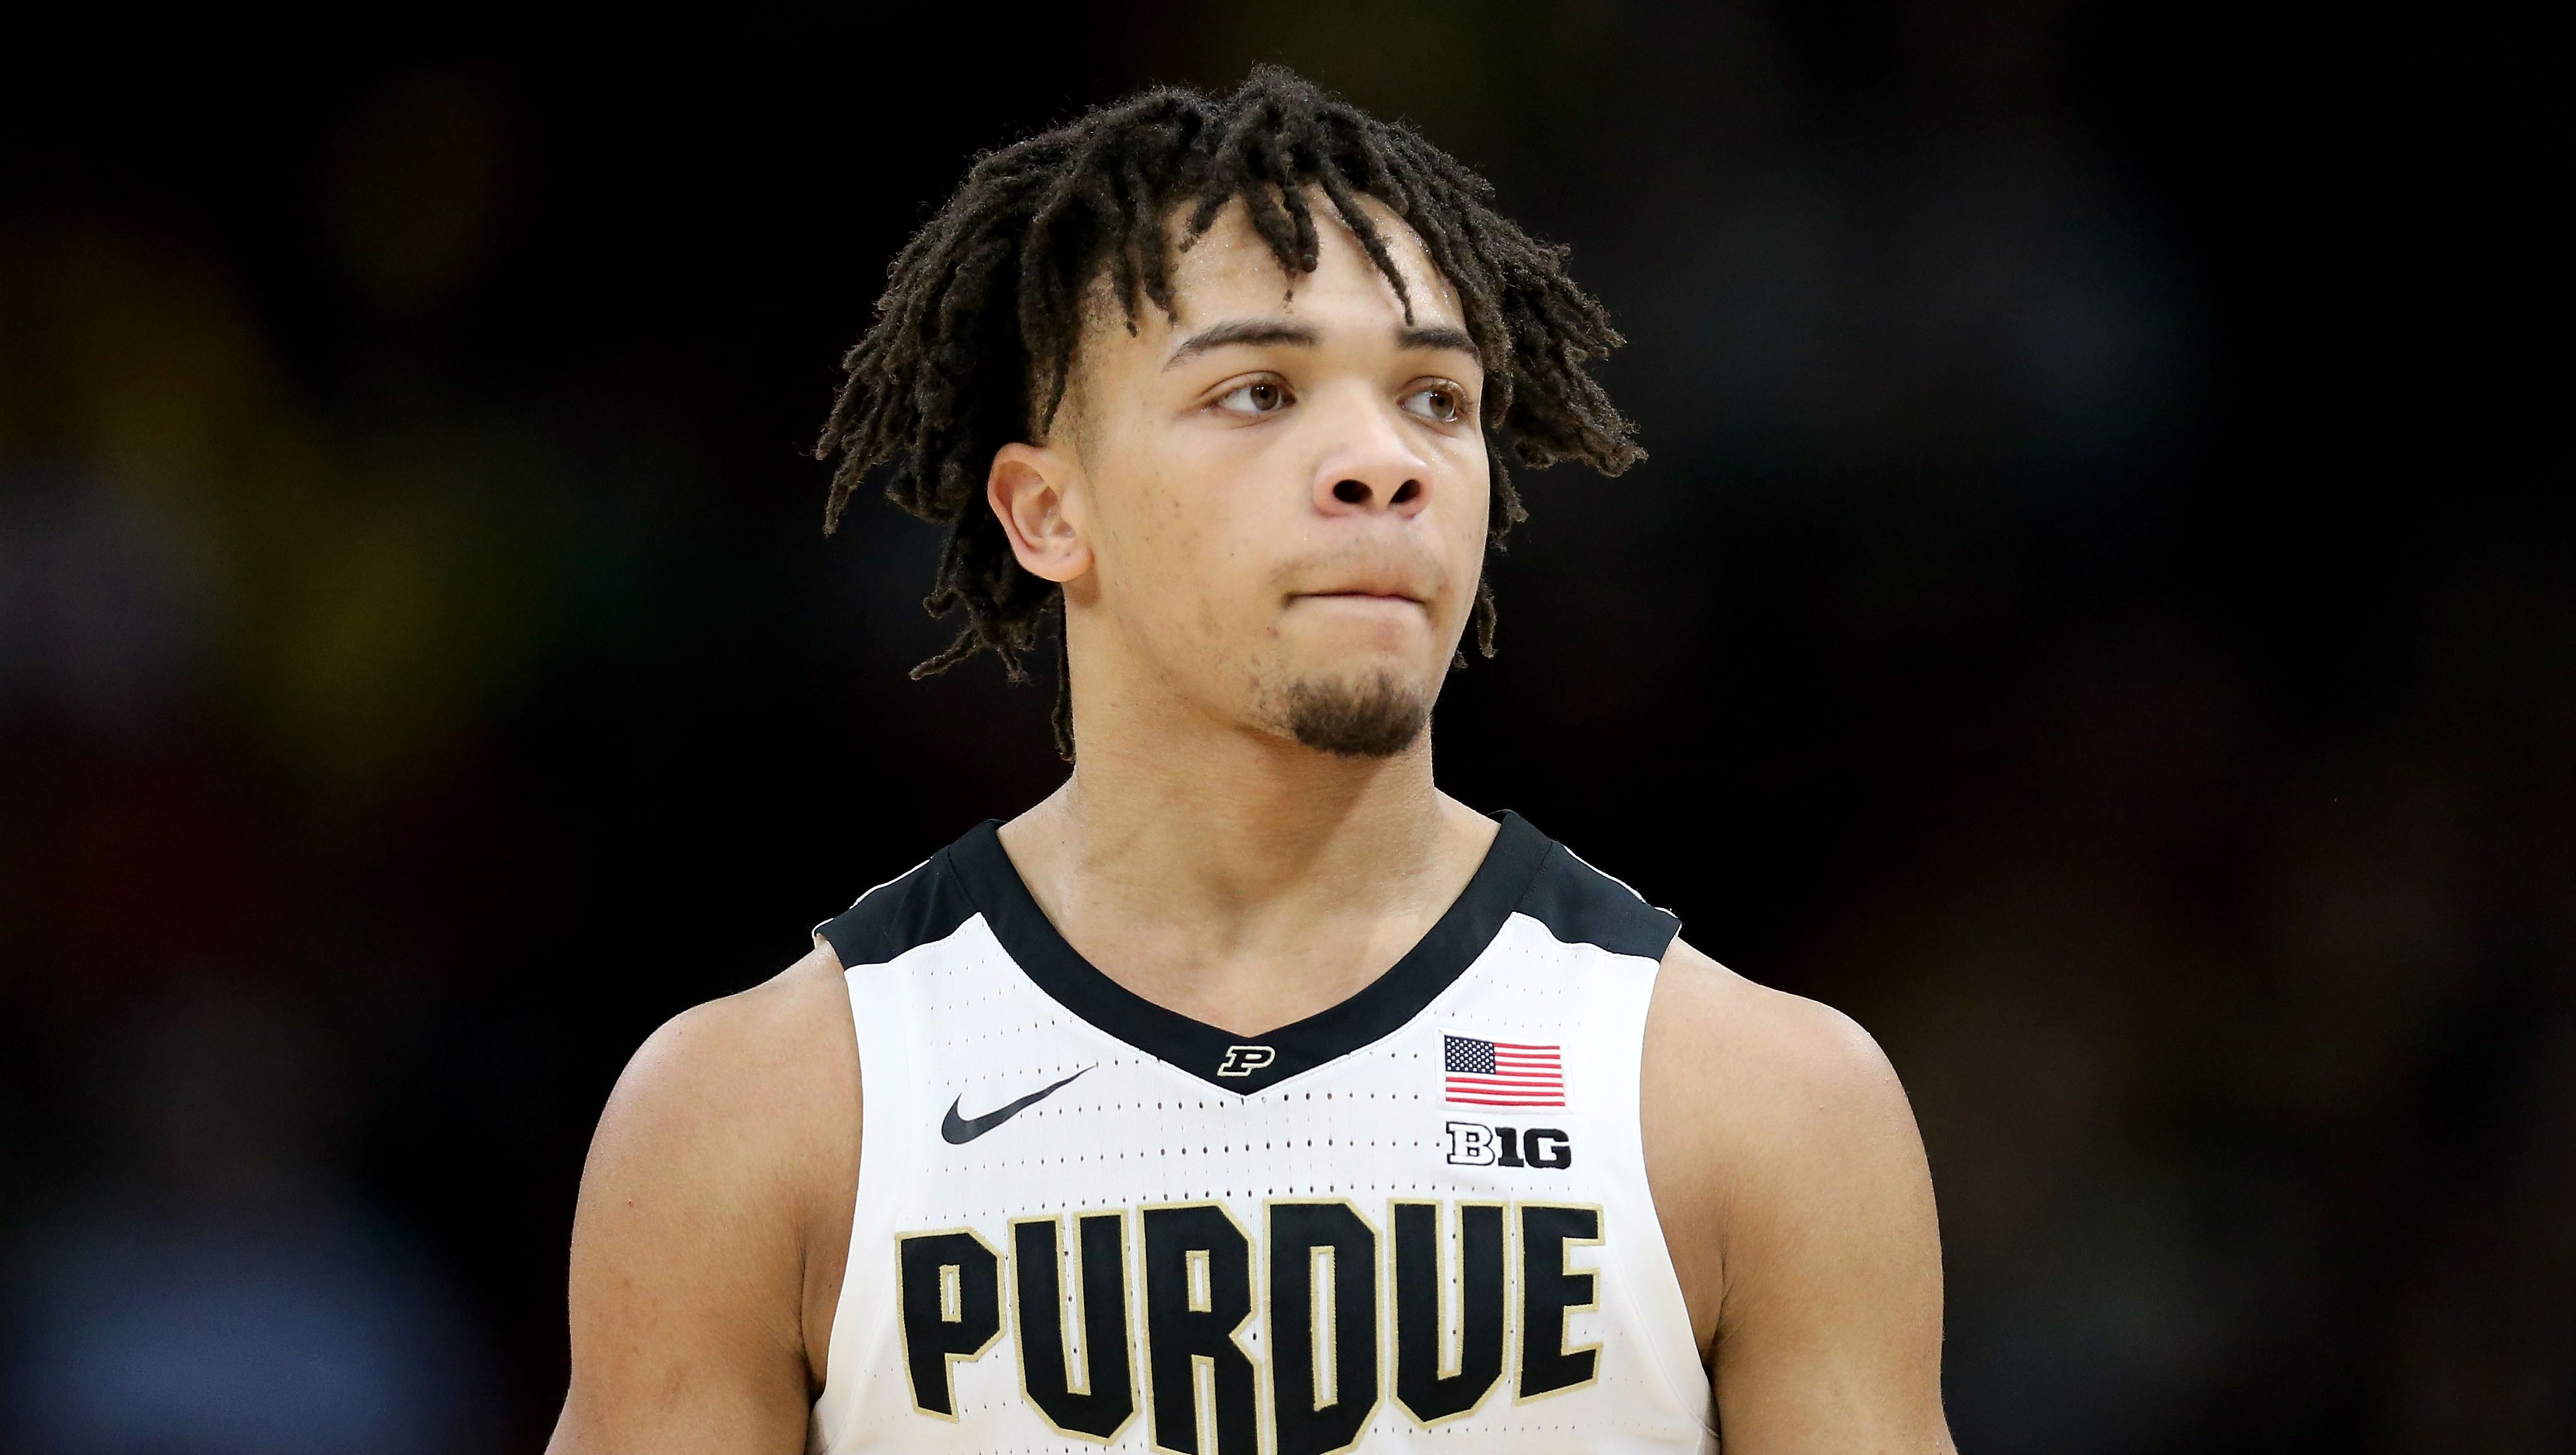 Where Purdue's Carsen Edwards could find a home in the NBA - The Athletic